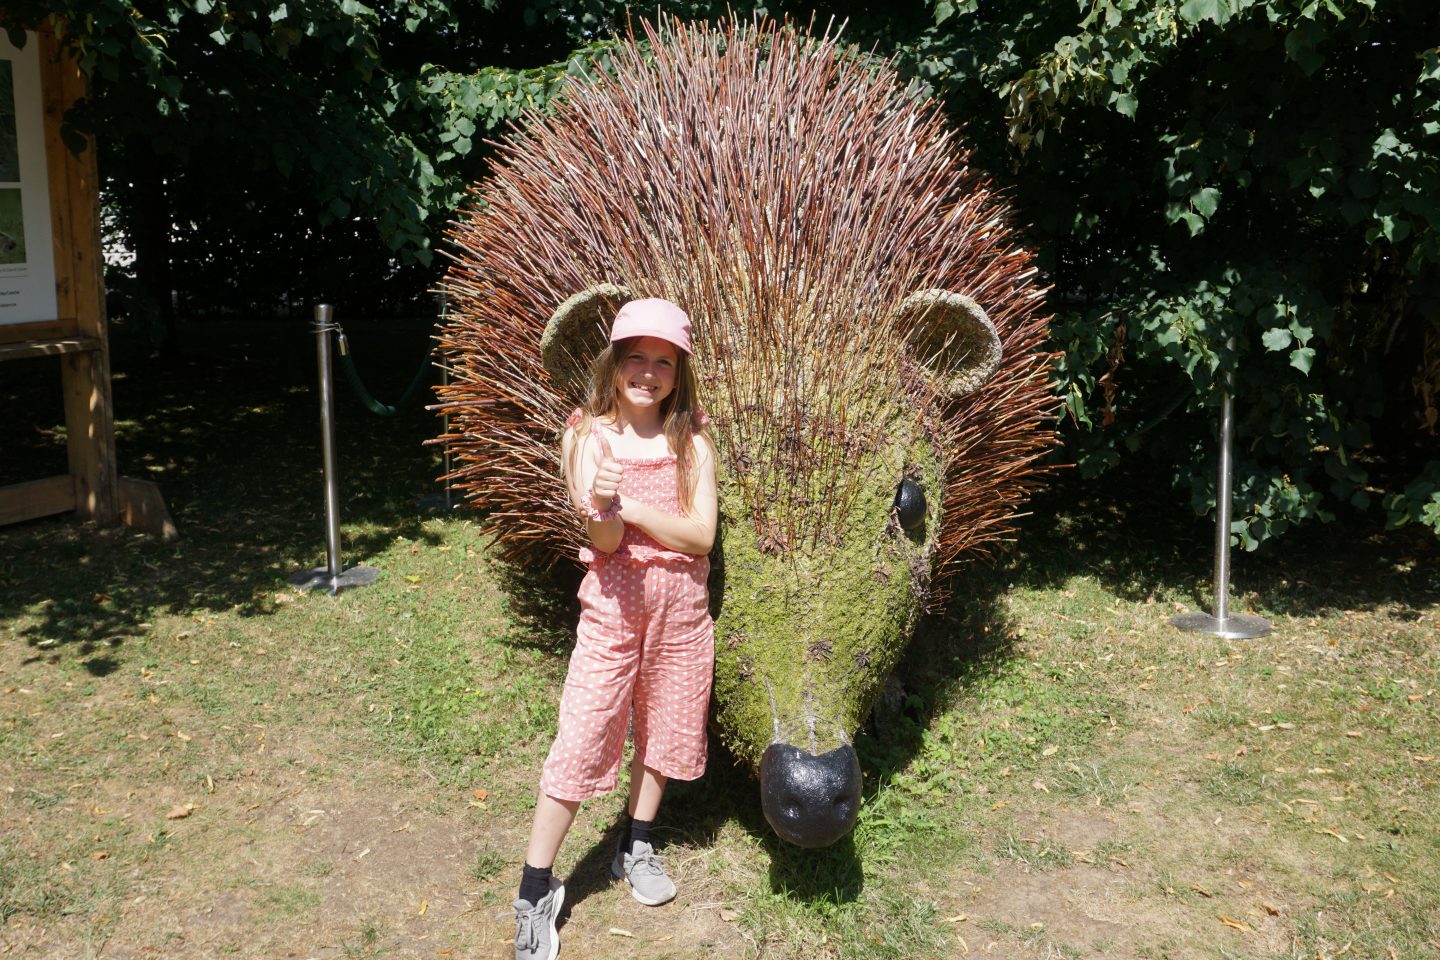 Giant hedgehog sculpture with girl dressed in pink stood beside it